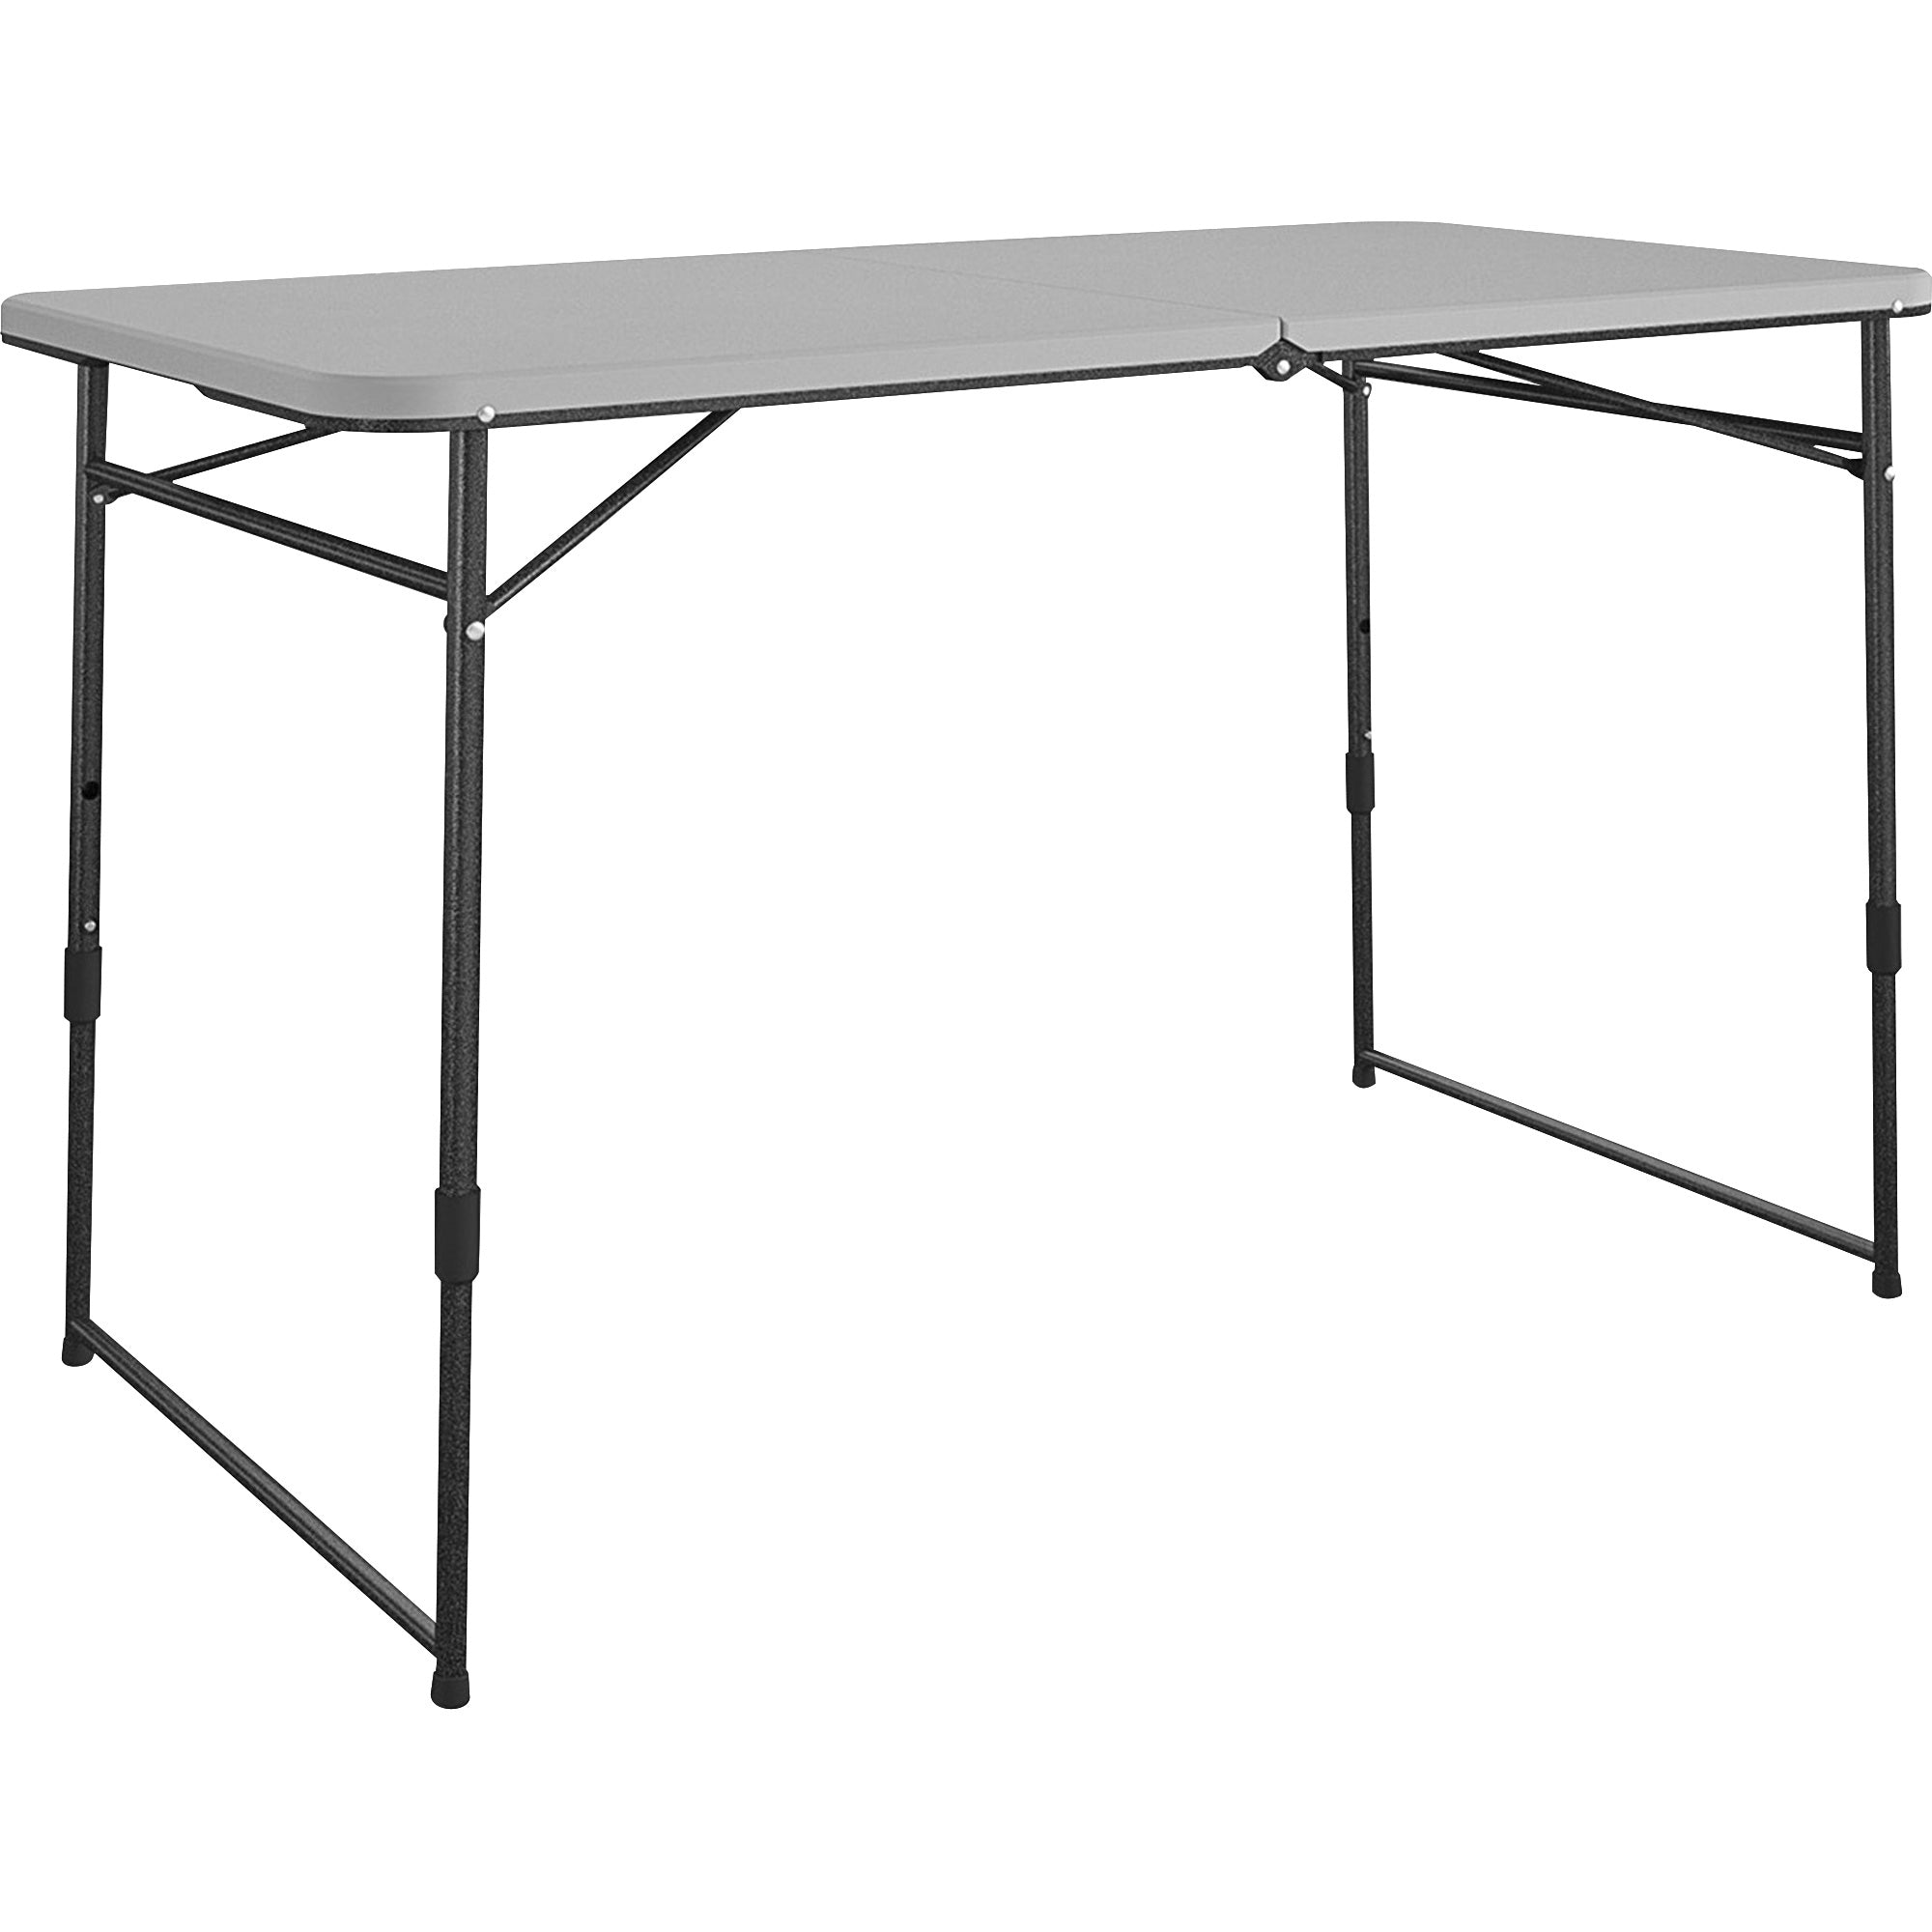 cosco-fold-portable-indoor-outdoor-utility-table-200-lb-capacity-adjustable-height-x-48-table-top-width-x-24-table-top-depth-28-height-gray-steel-resin-1-each_csc14400gry1e - 1